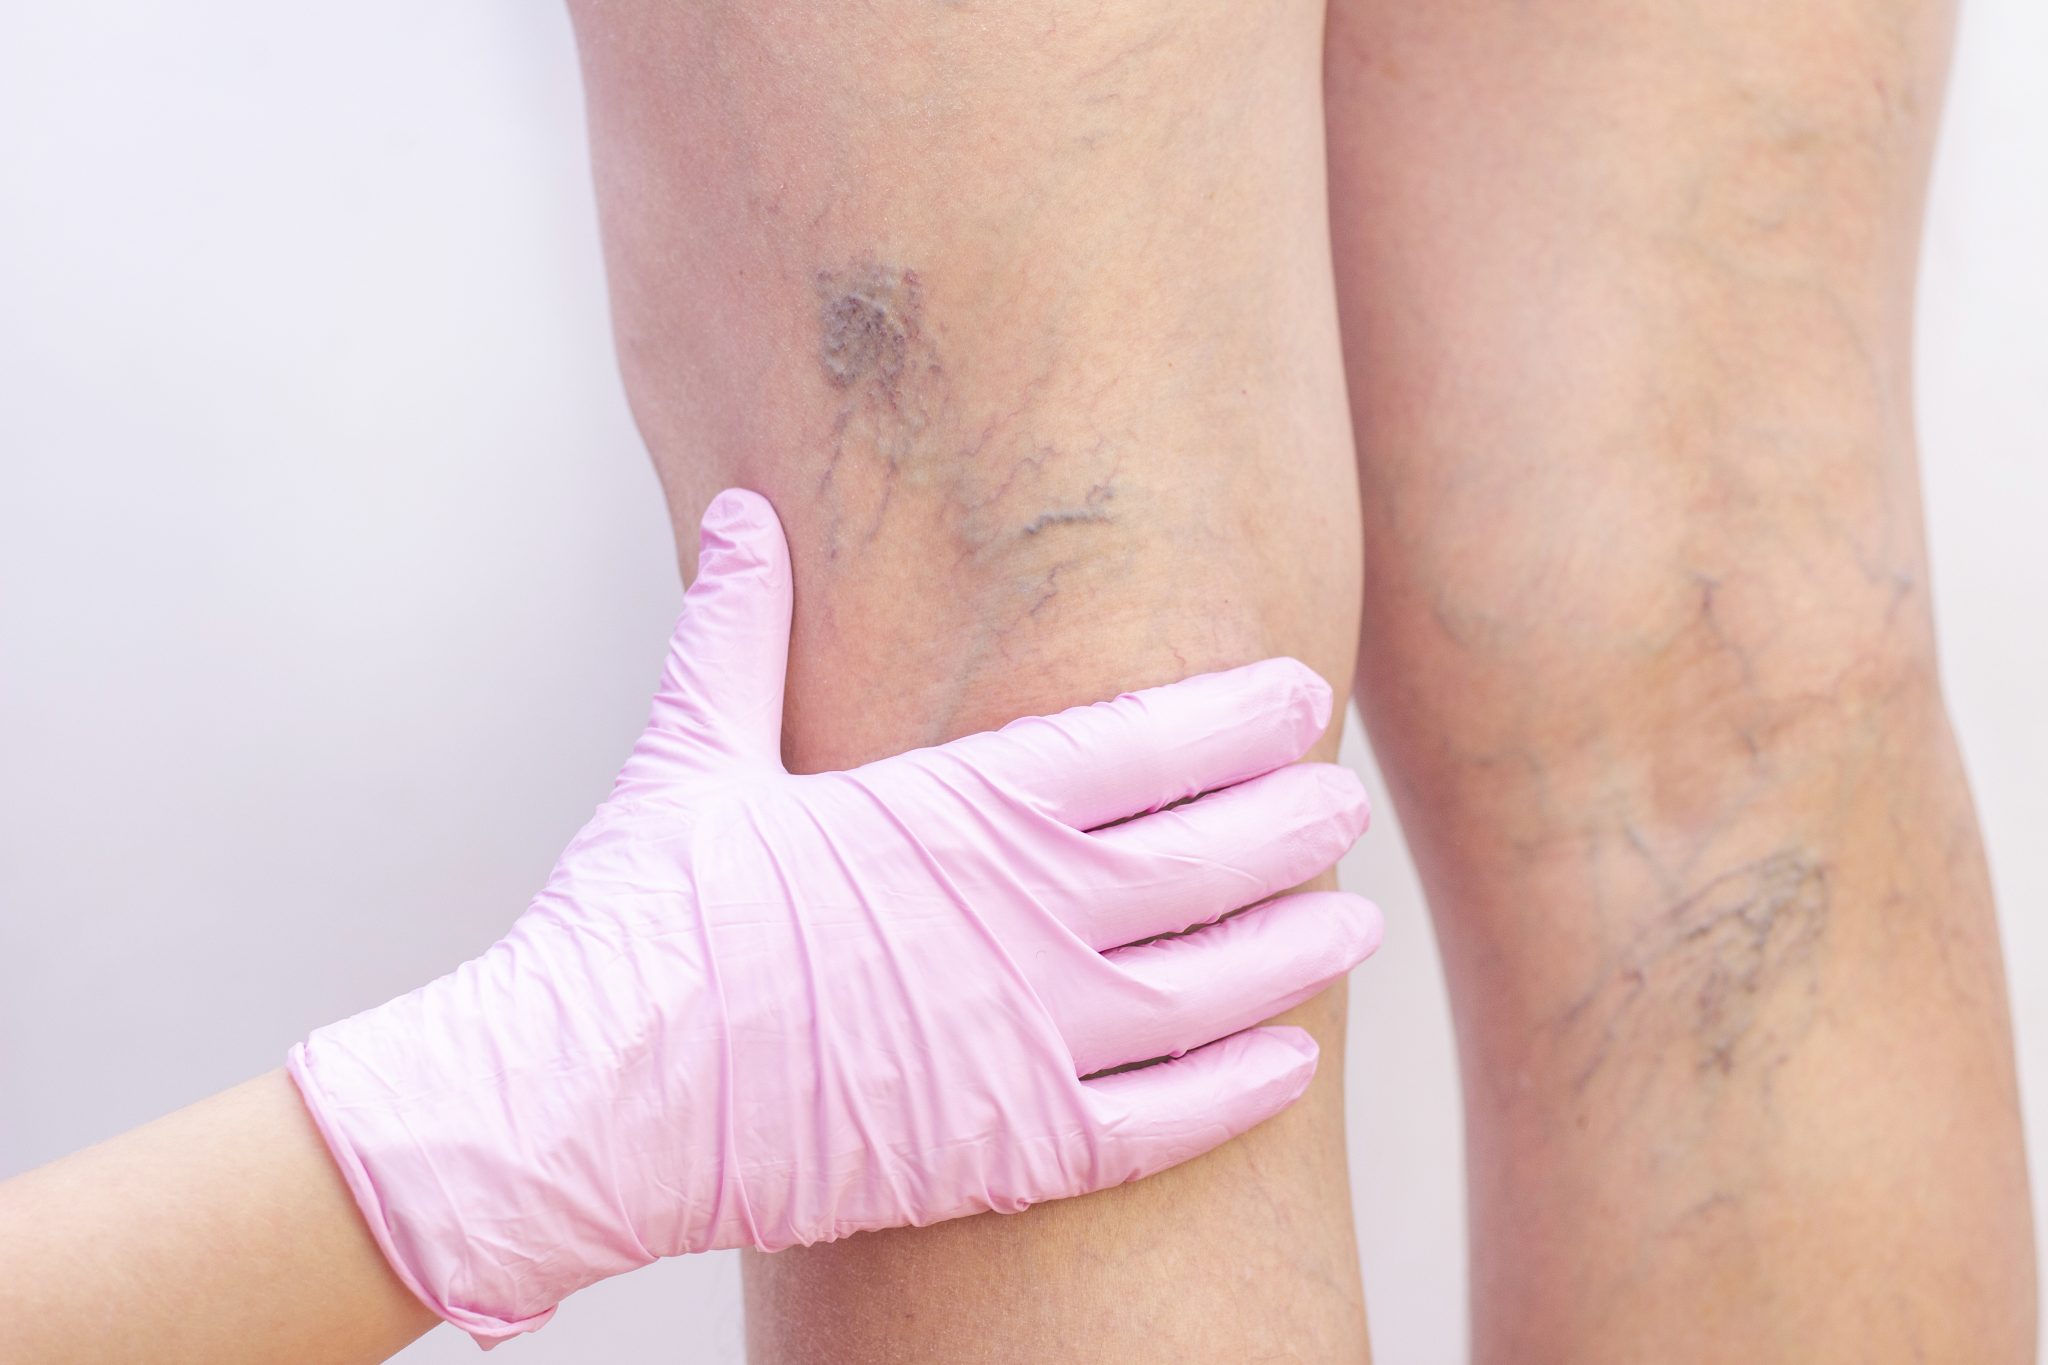 What Kind of Specialist Treats Varicose Veins